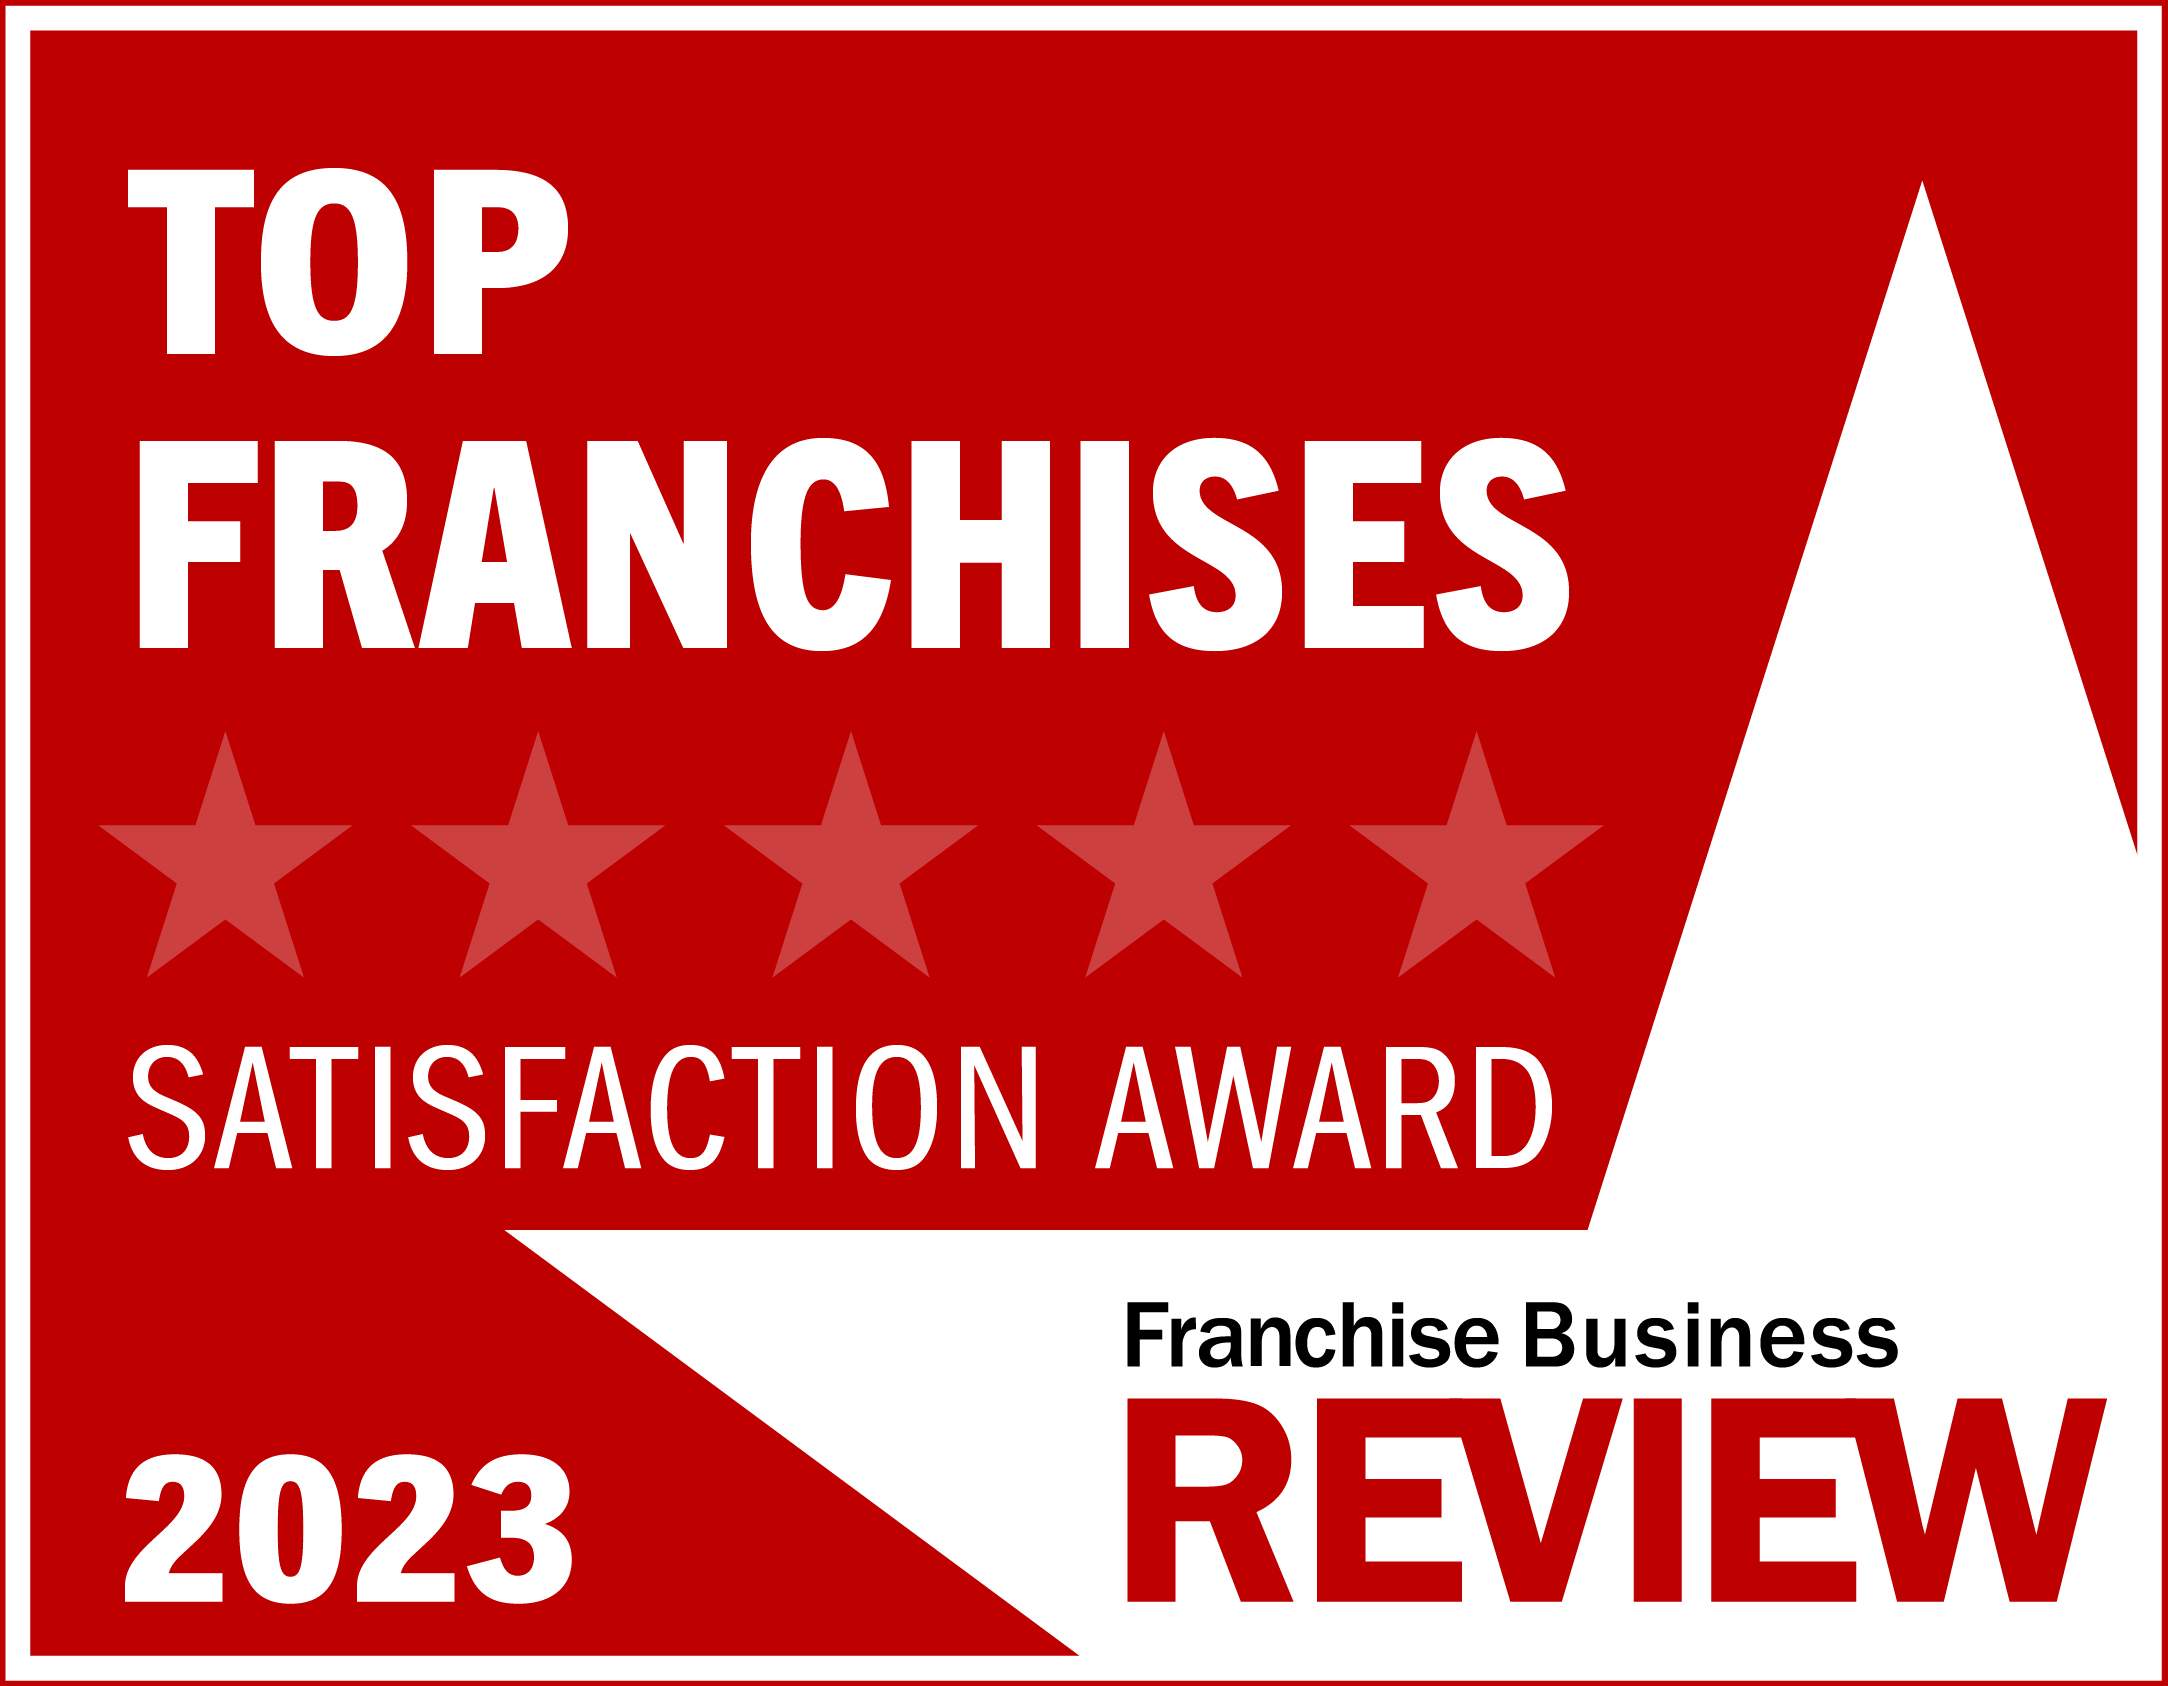 Top Franchises Satisfaction Award 2023 - Franchise Business Review